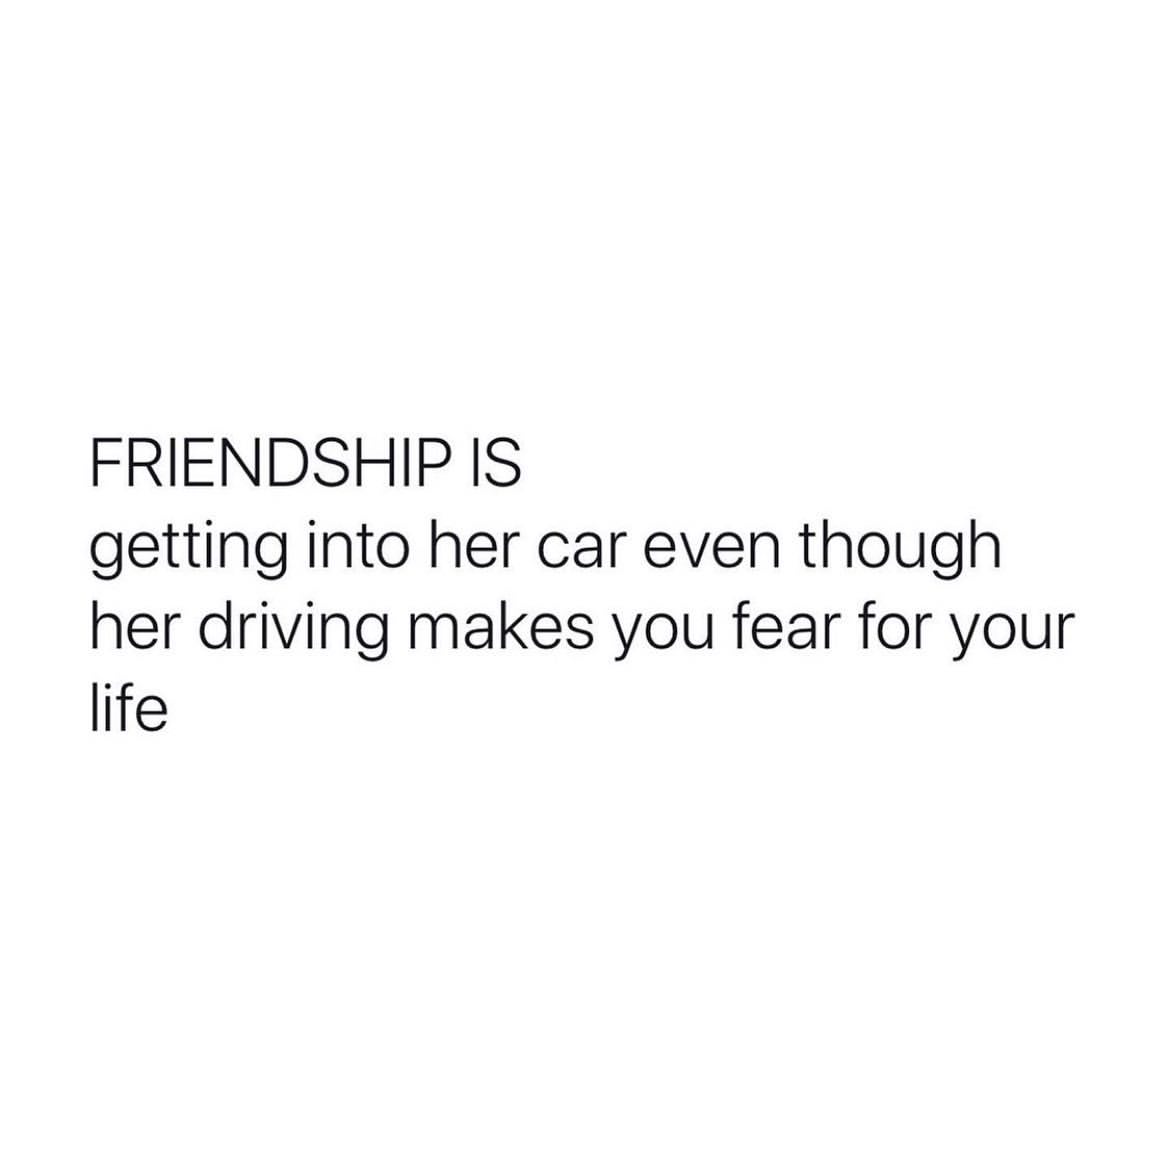 Friendship is getting into her car even though her driving makes you fear for your life.